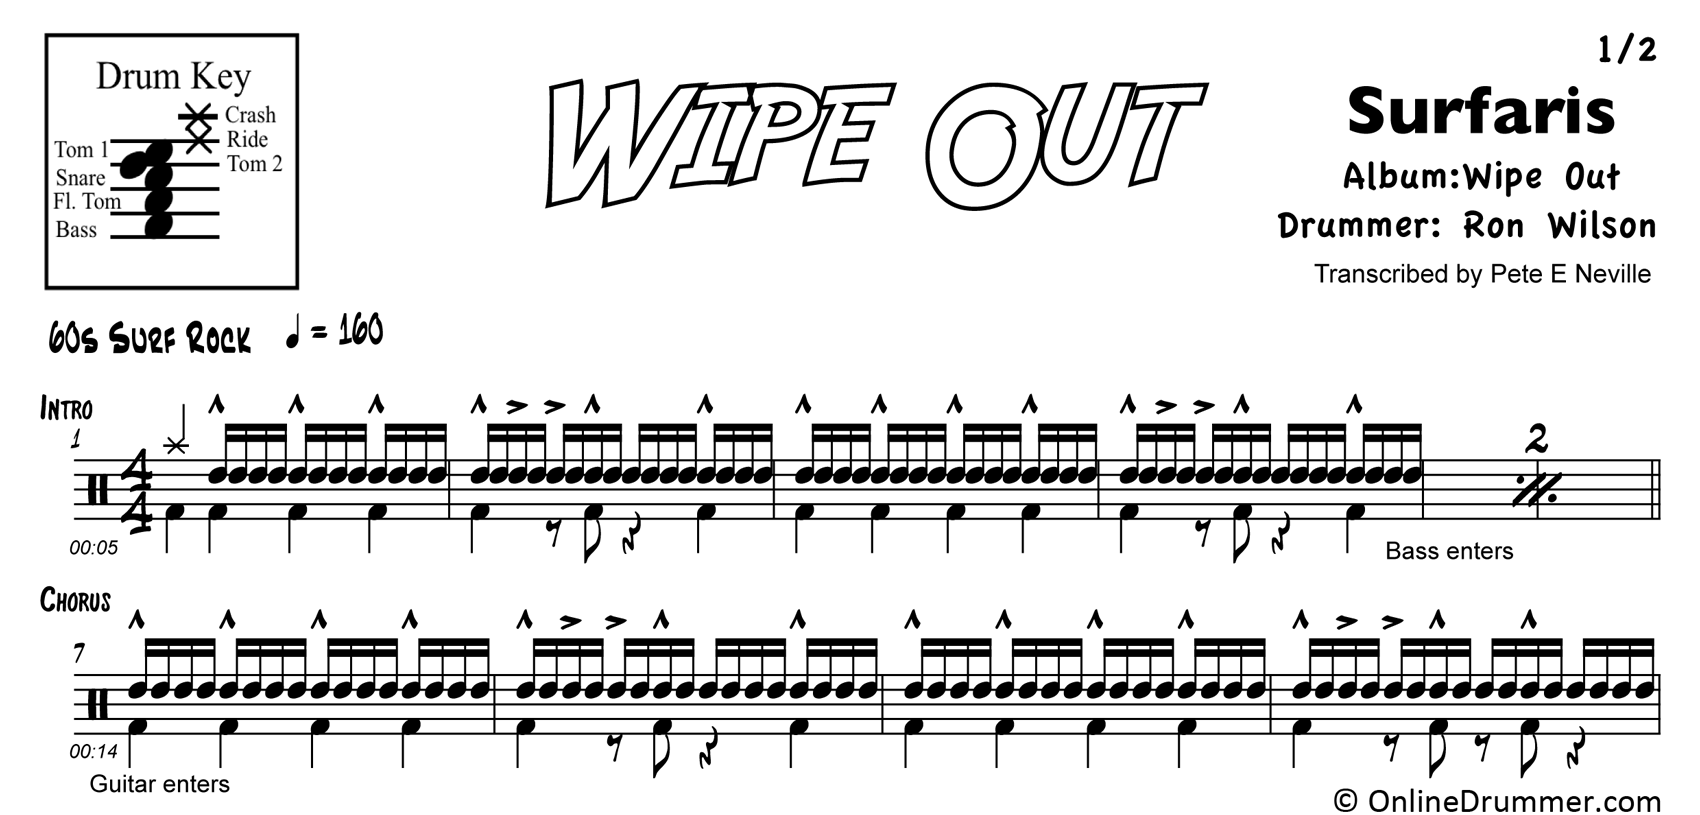 Wipe Out - The Surfaris - Drum Sheet Music